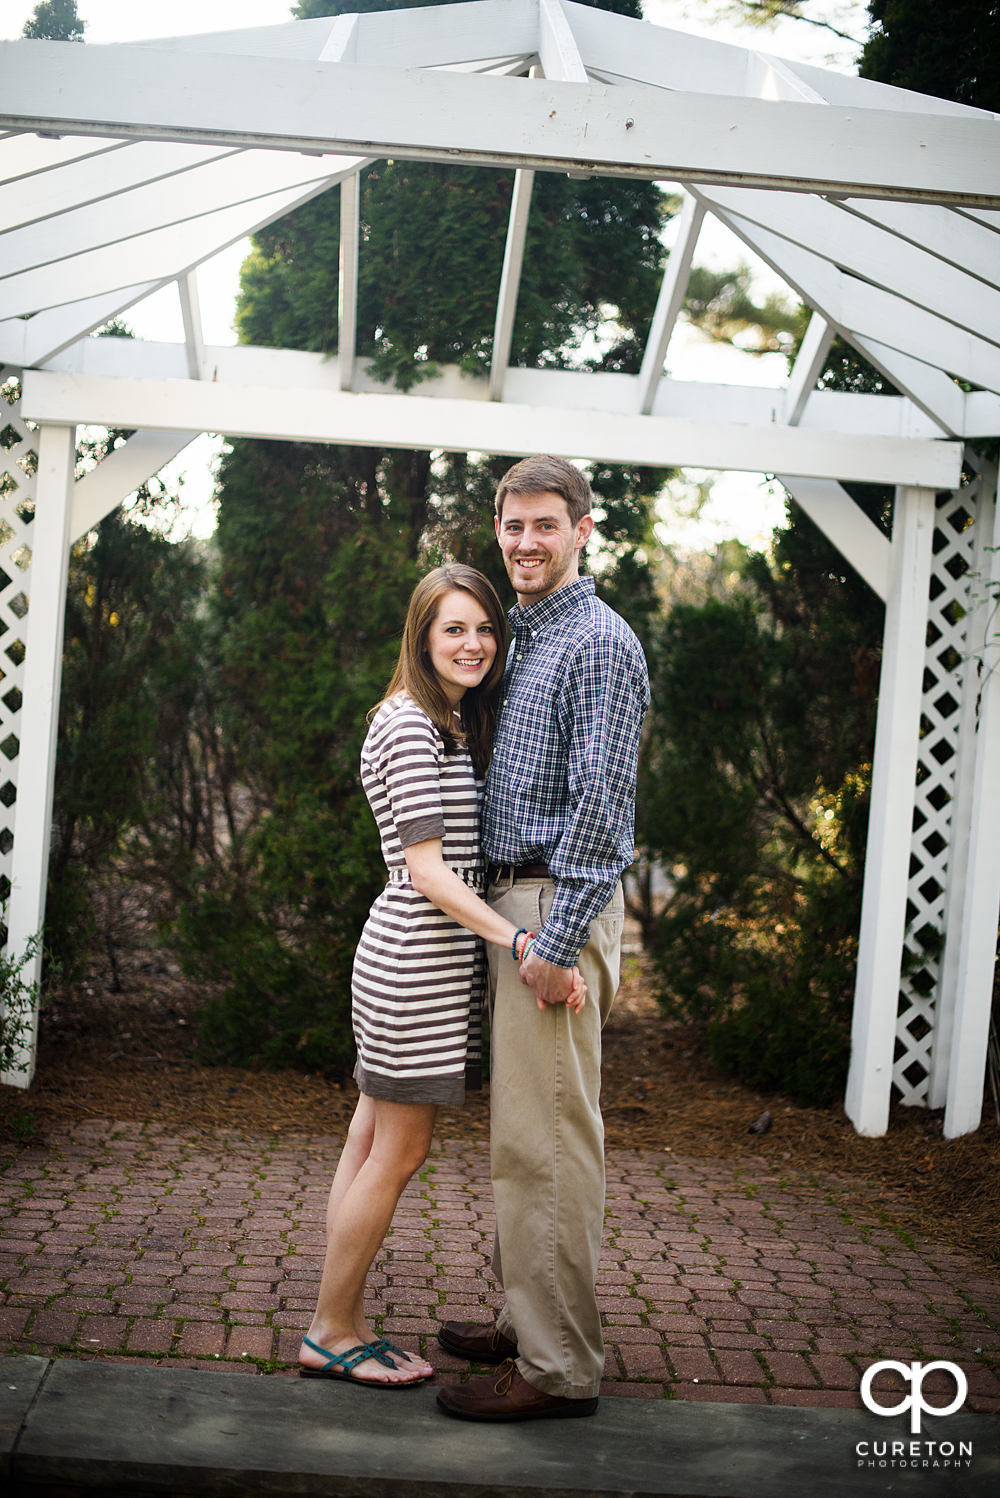 Future bride and groom smilin during an engagement session at the Botanical Gardens in Clemson.